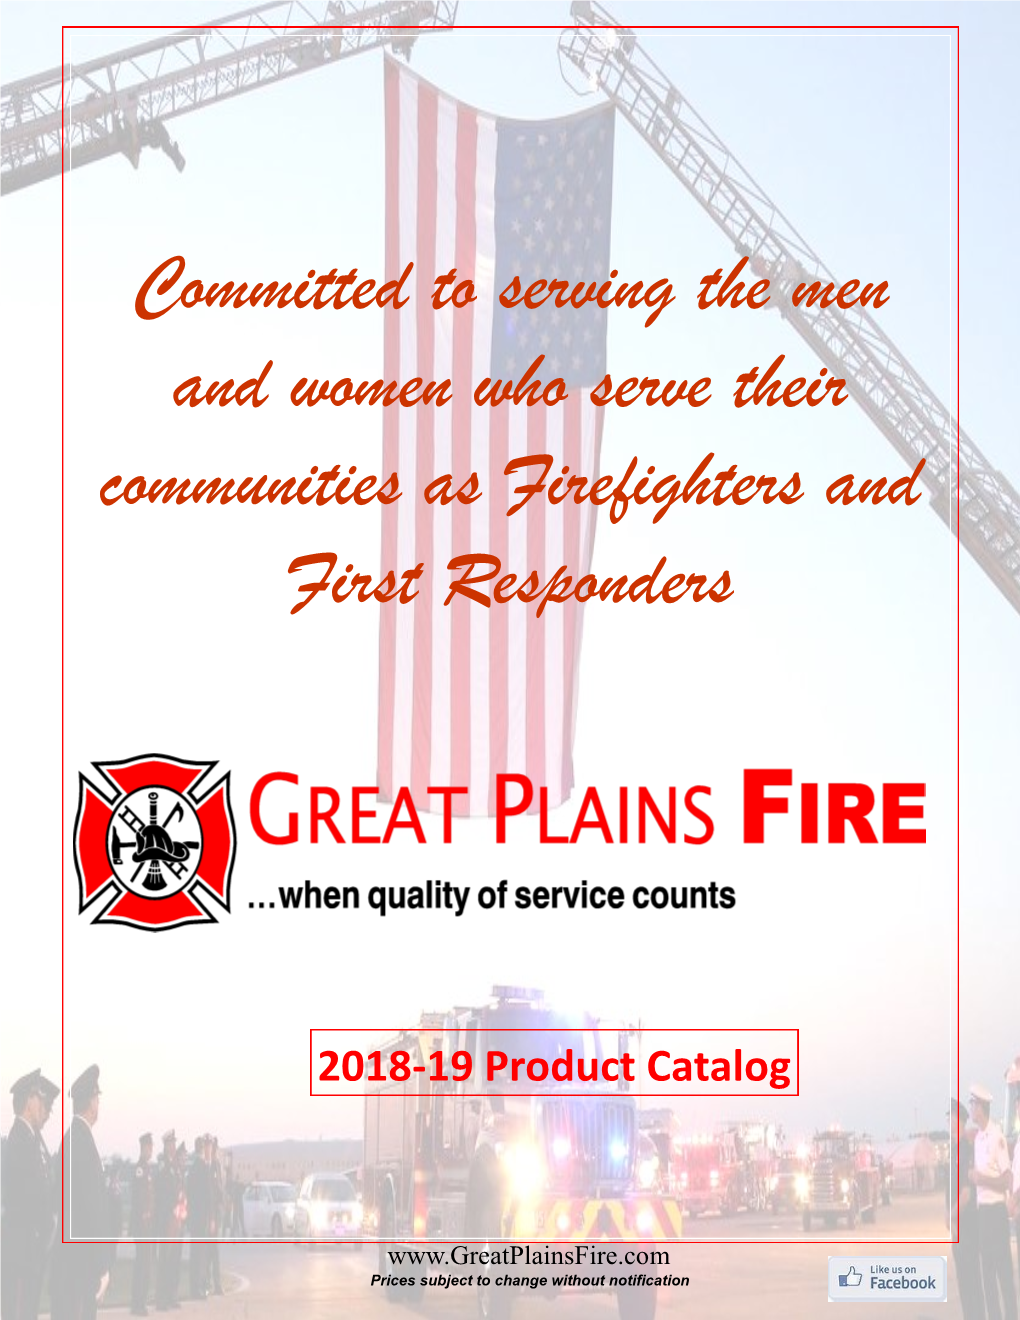 Committed to Serving the Men and Women Who Serve Their Communities As Firefighters and First Responders